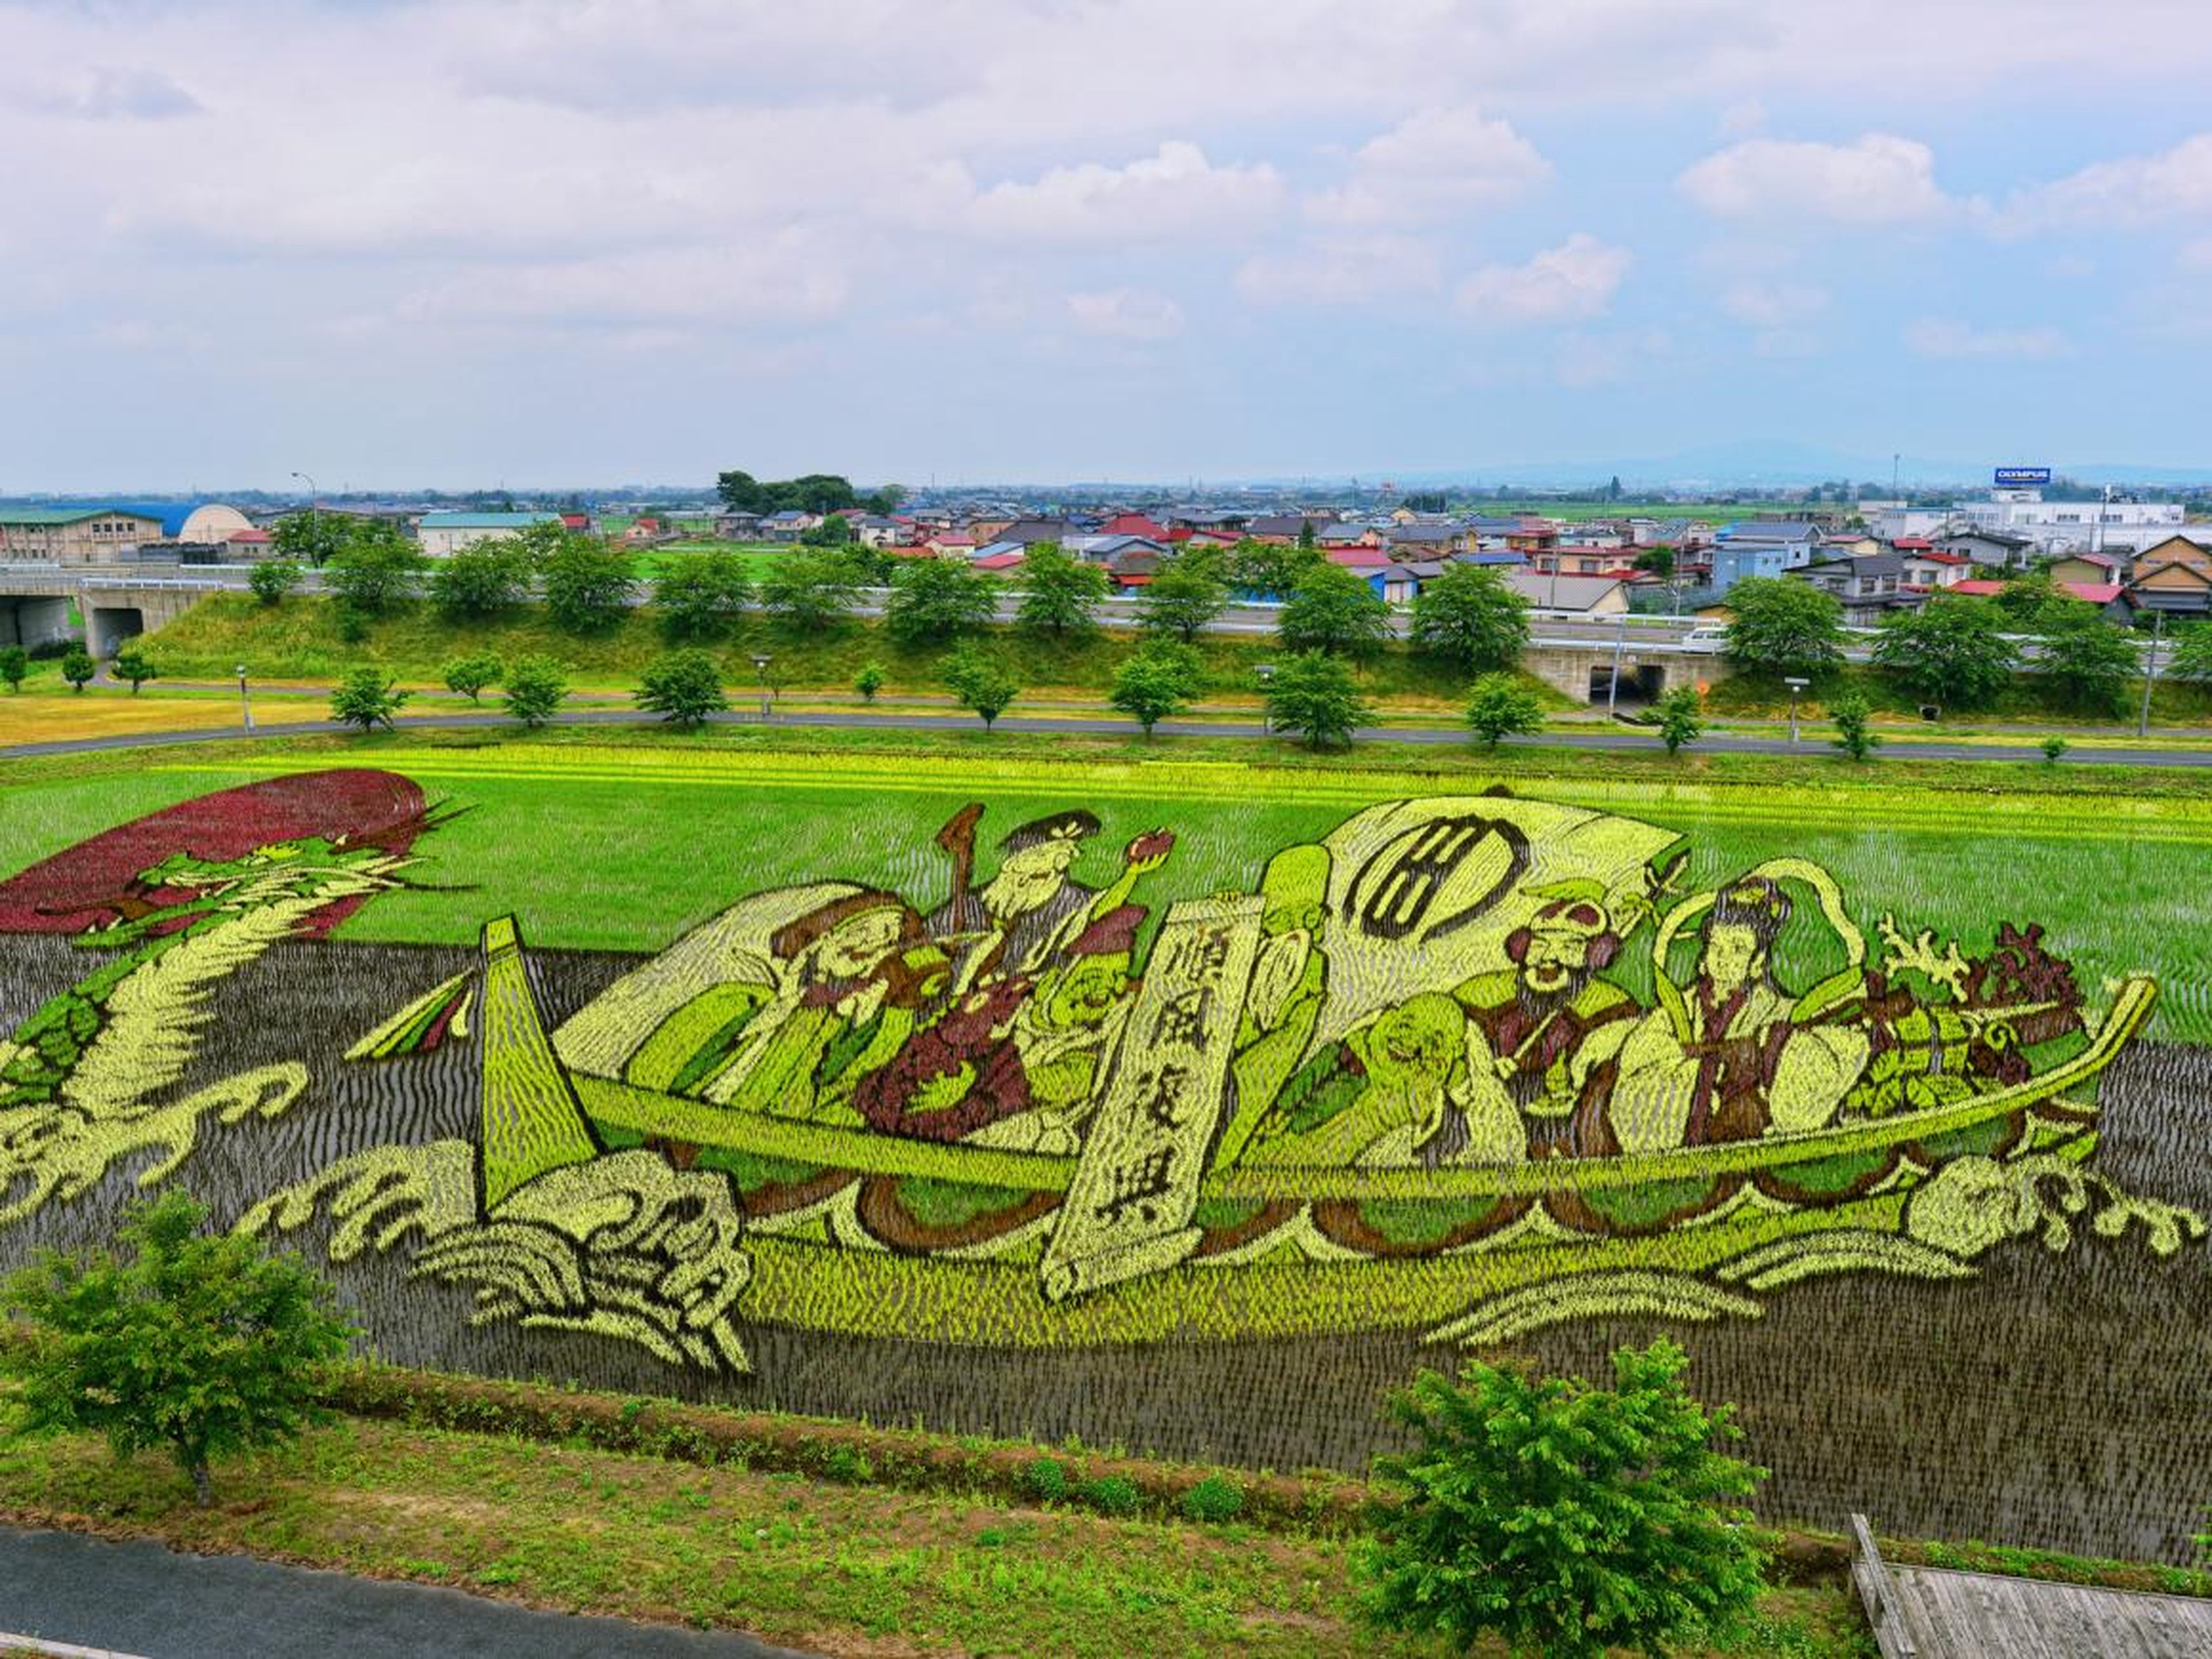 Rice farmers started making painting-like images in the paddies by planting different color rice plants in certain areas — think of it as a paint-by-numbers exercise.